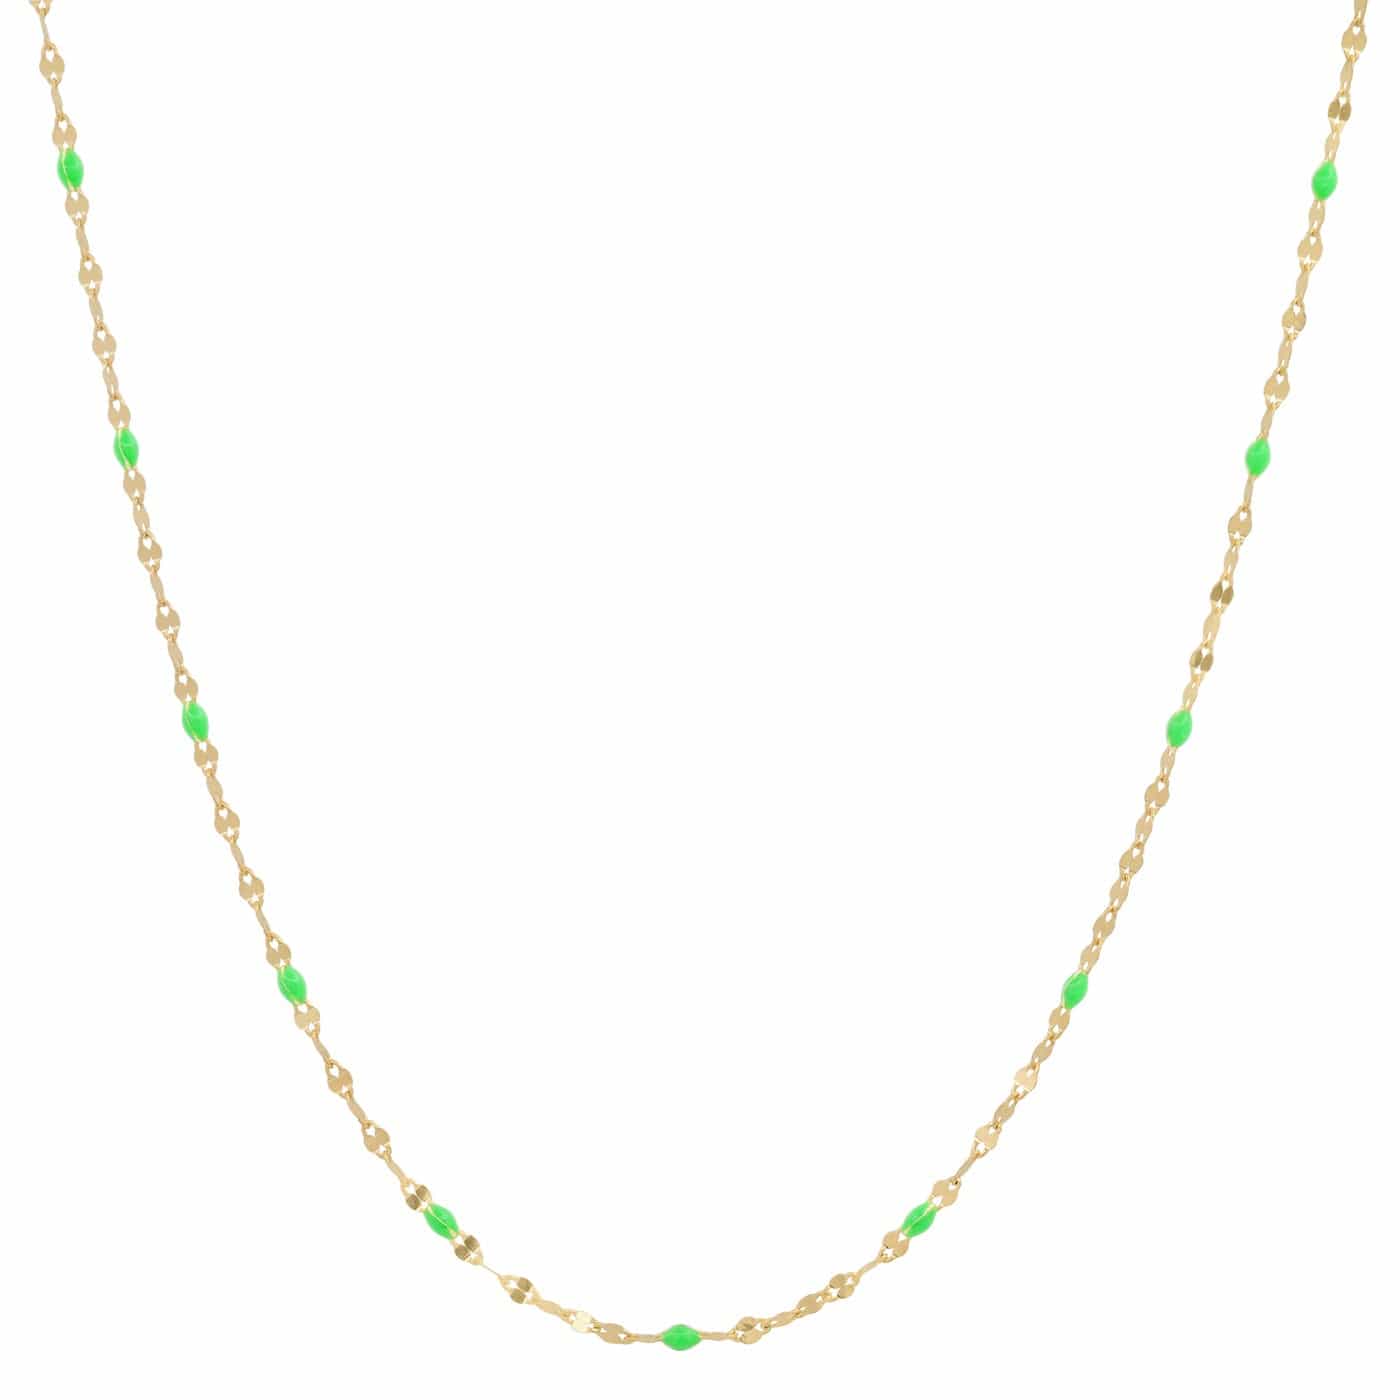 TAI JEWELRY Necklace Gold/Neon Green Gold Vermeil Sparkle Chain with Enamel Stations